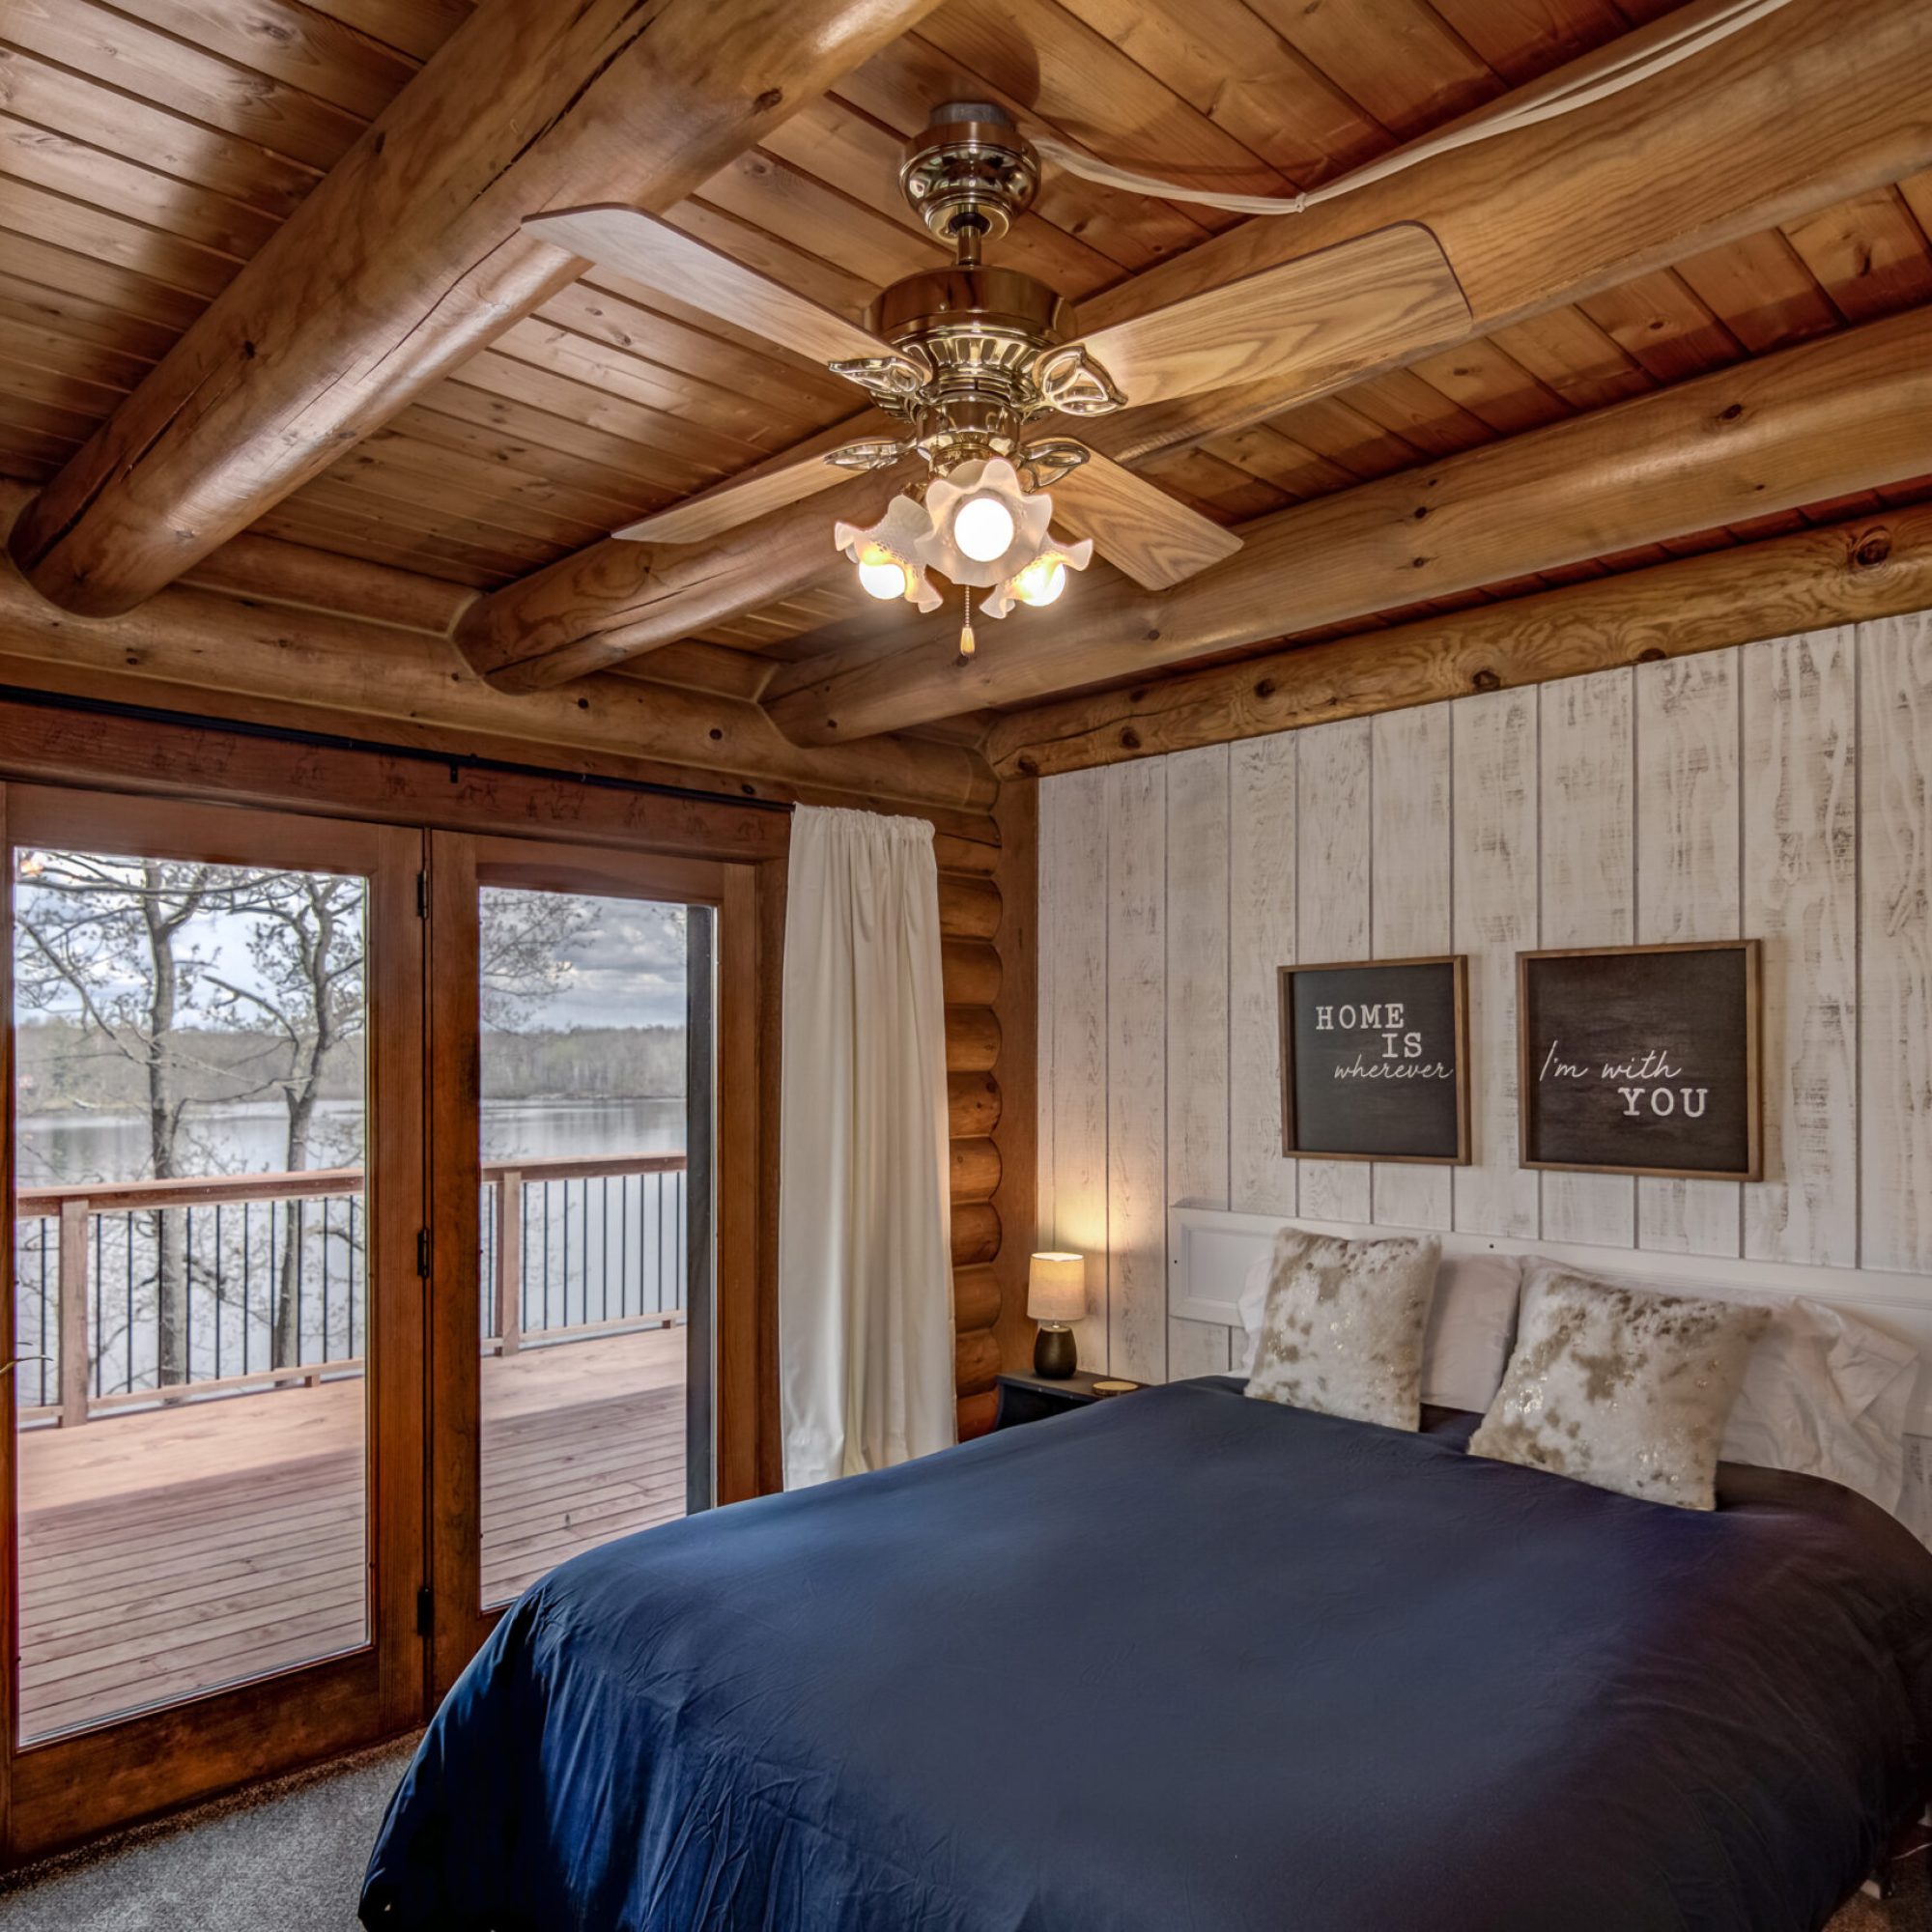 Bedroom with deck access and lake view